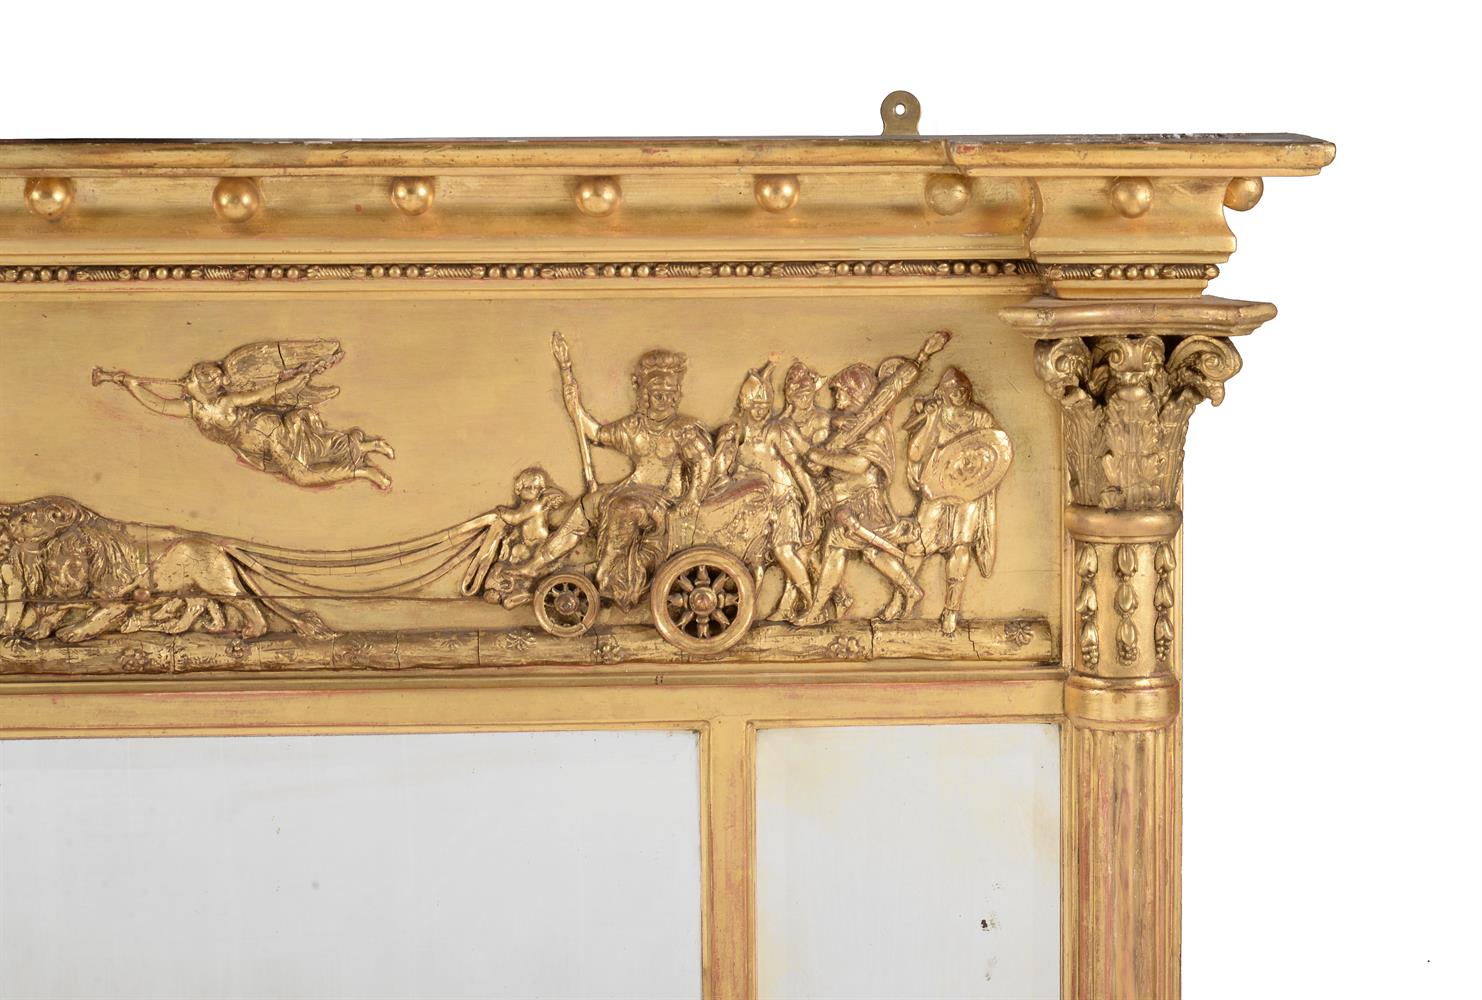 A GILTWOOD AND GILT GESSO OVERMANTEL WALL MIRROR, EARLY 19TH CENTURY - Image 3 of 4